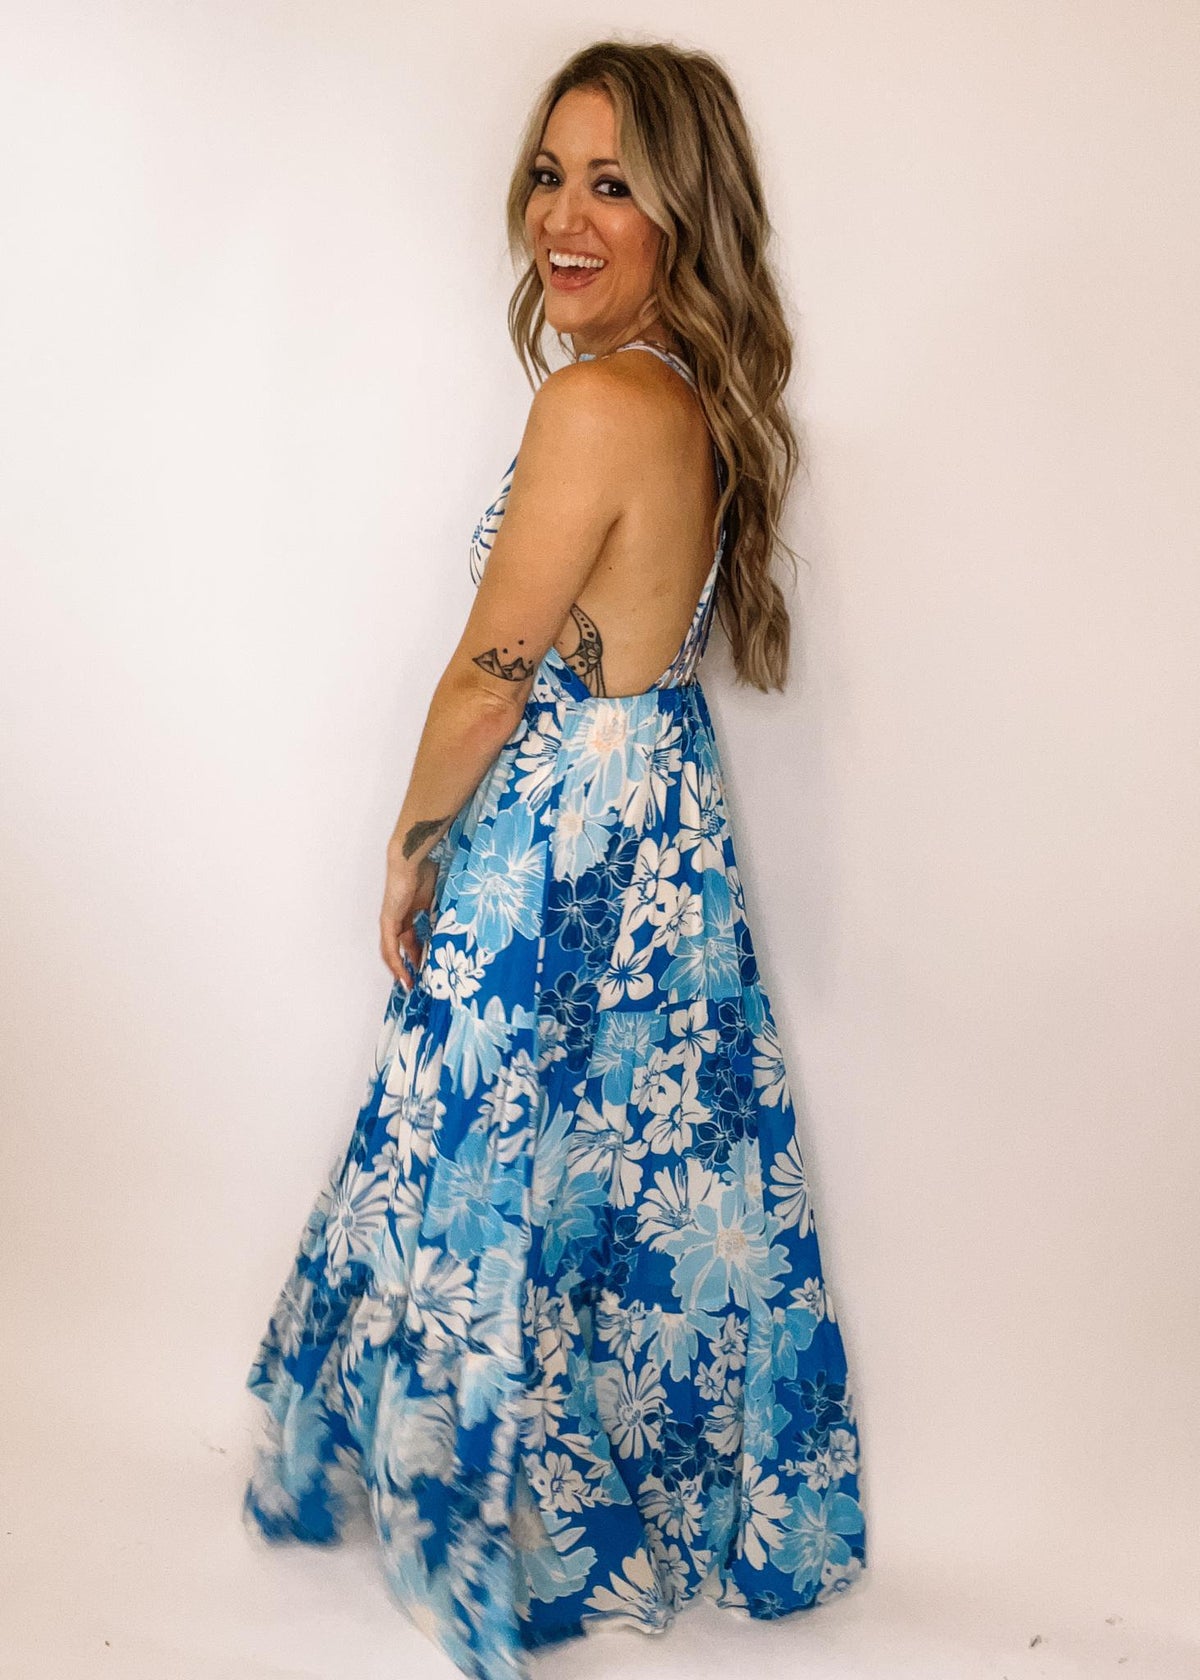 Blue Floral Chiffon Maxi Dress with Cross Strap Detail